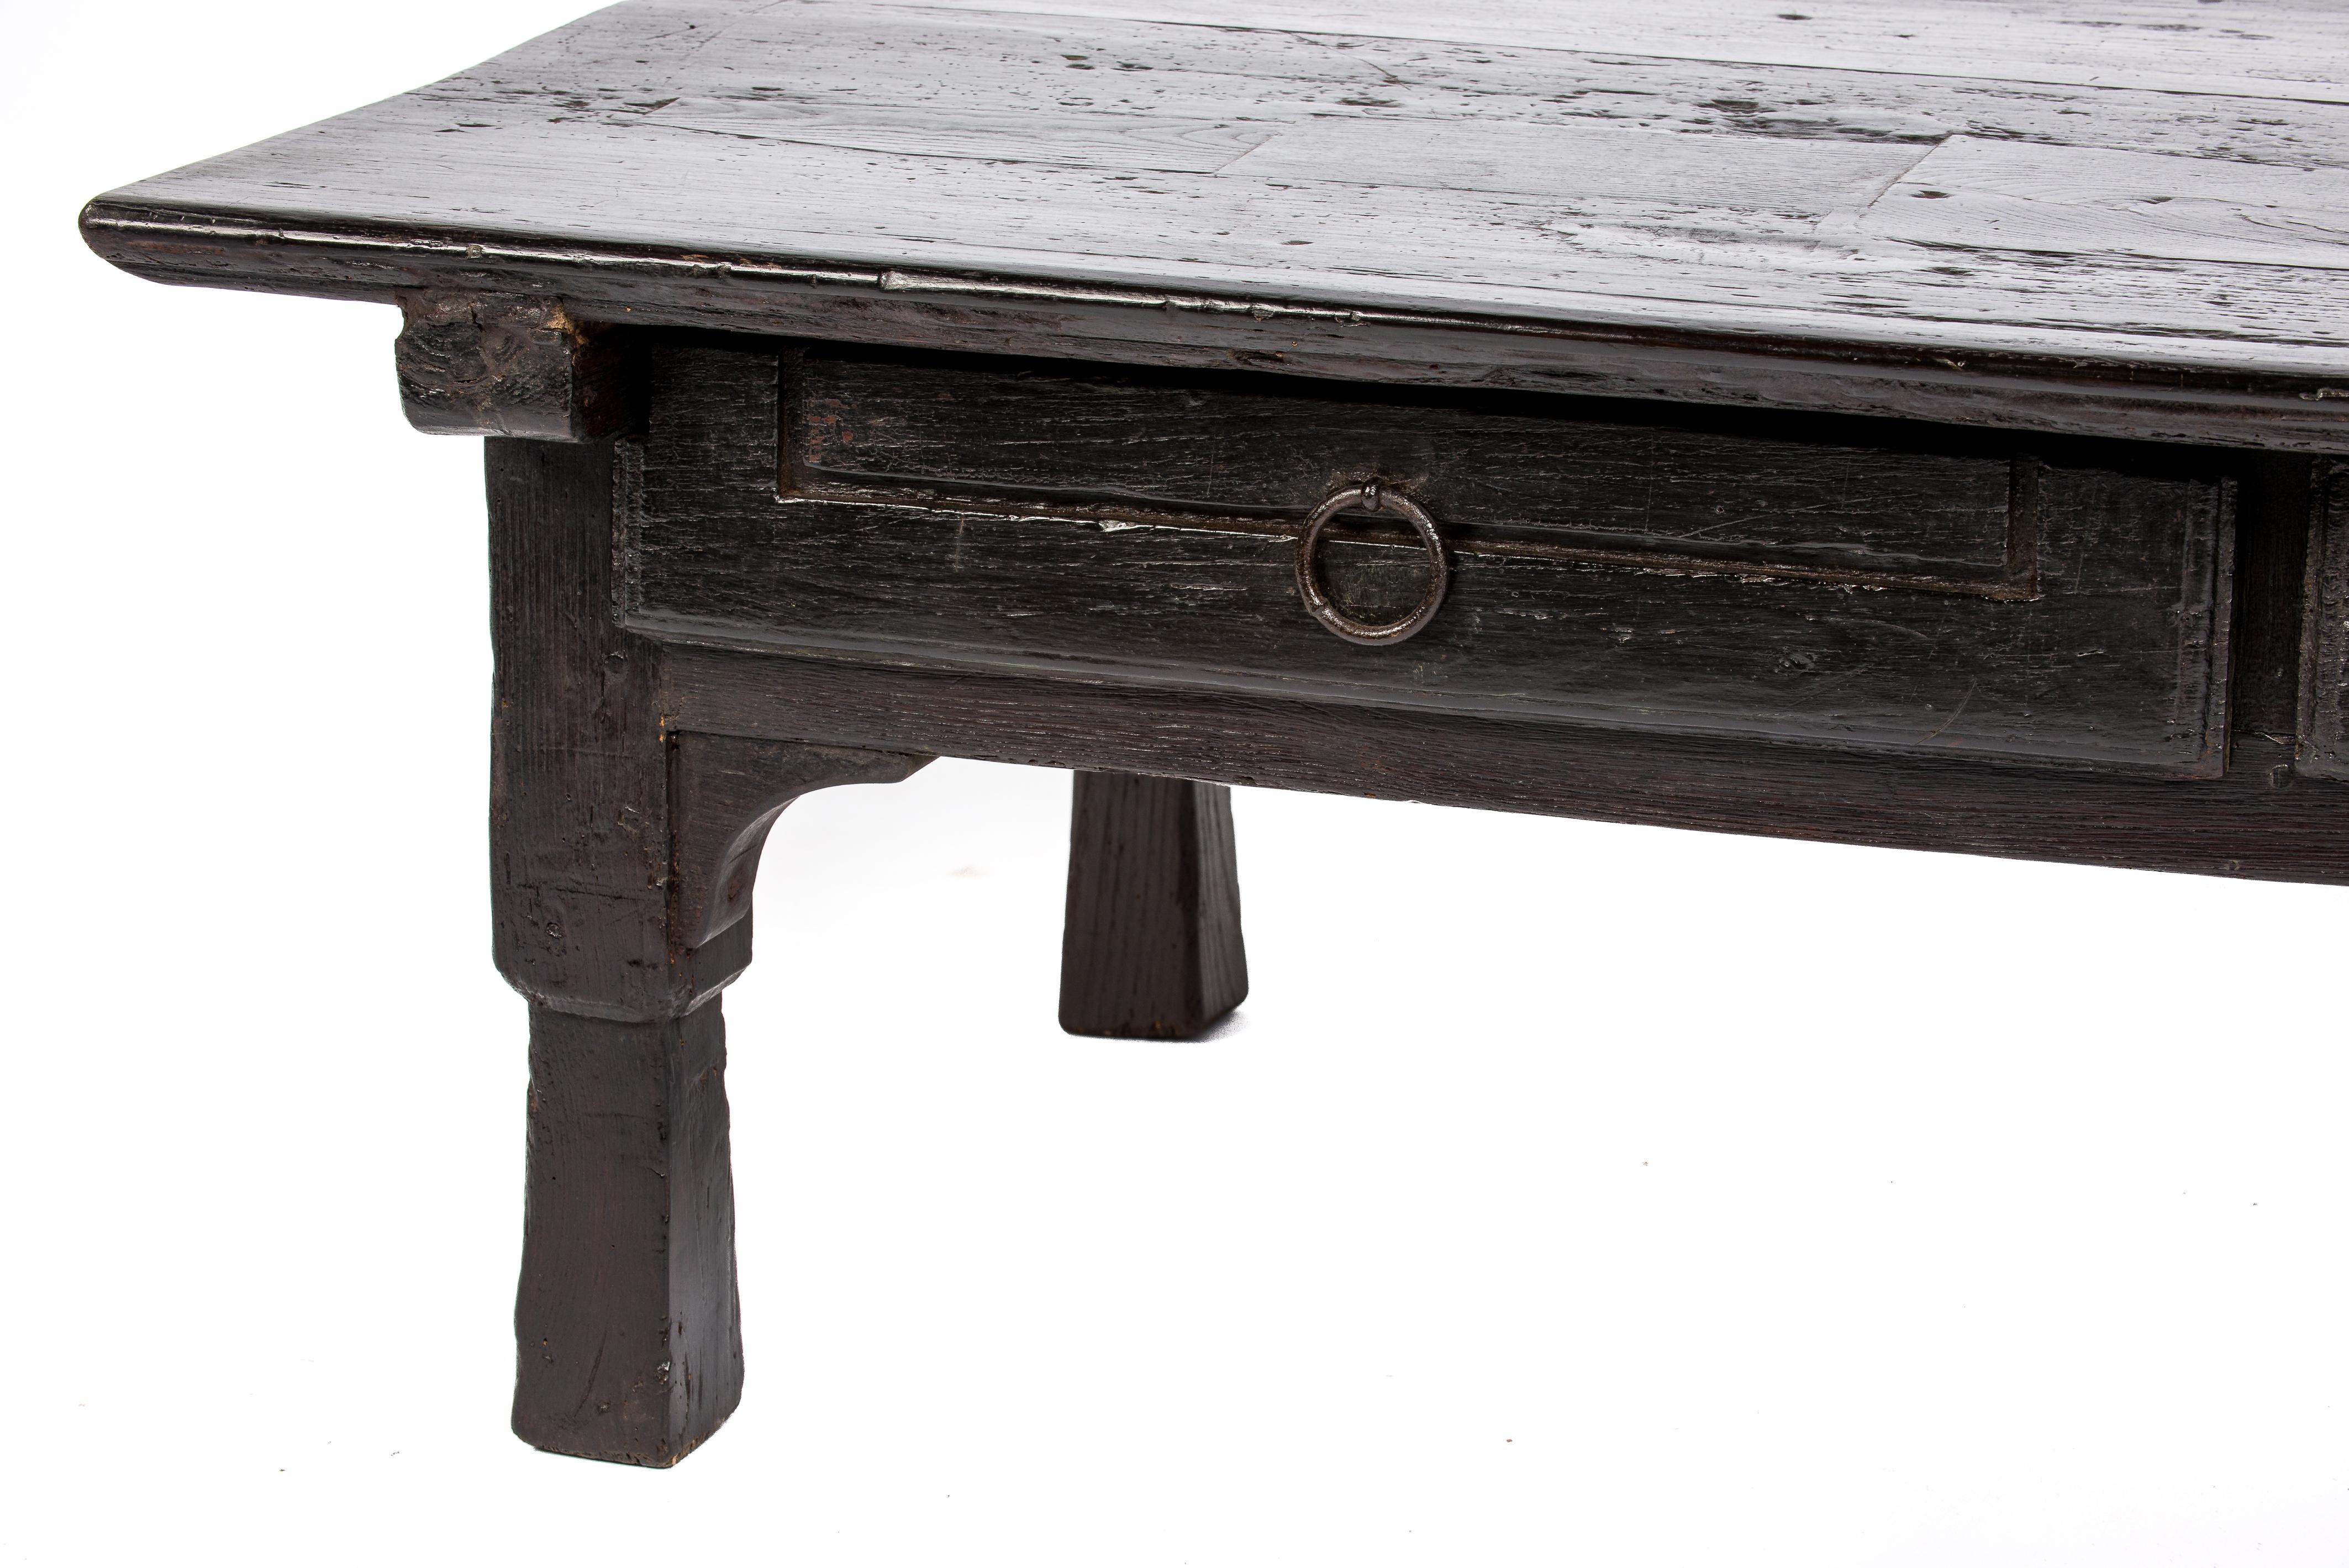 Polished Antique 19th Century Spanish Rustic Black Solid Chestnut Wood Coffee Table For Sale